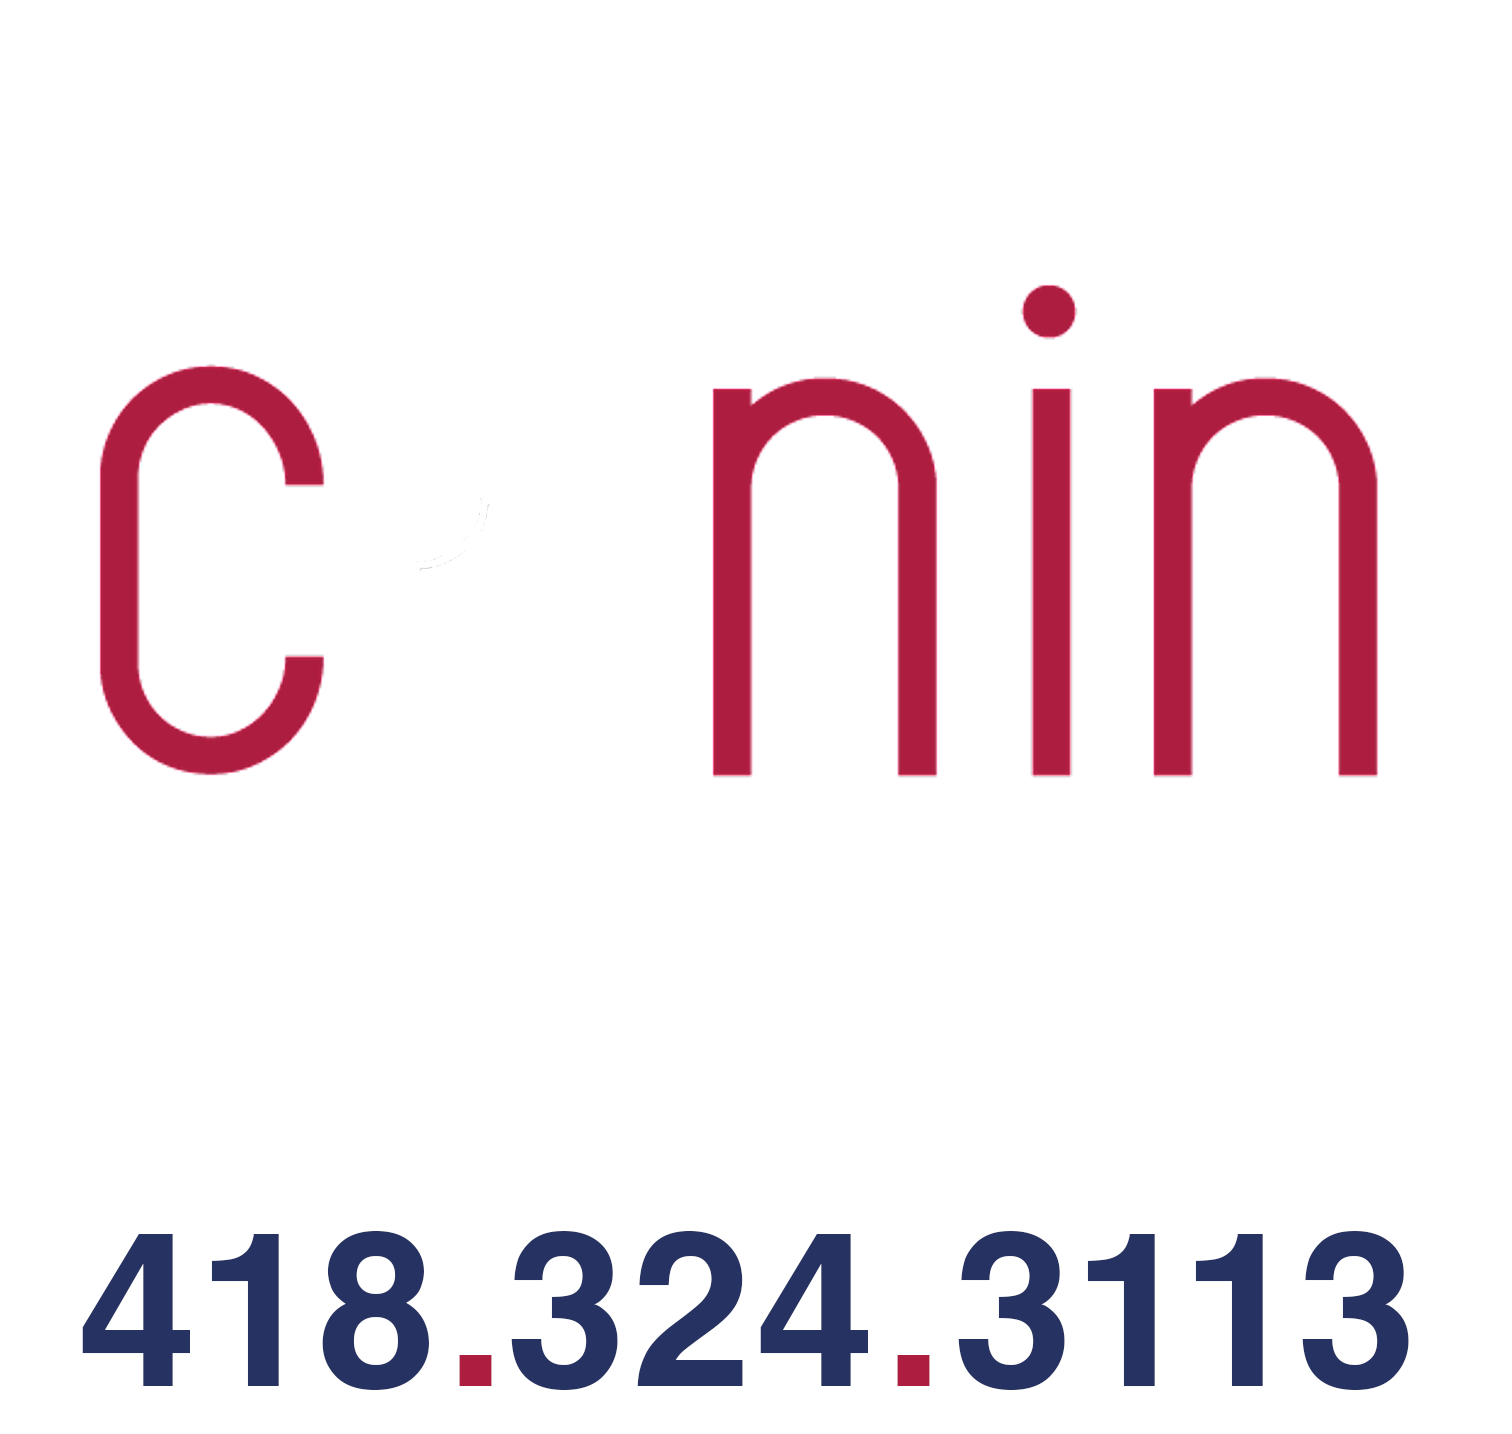 Comportement Canin Charlevoix